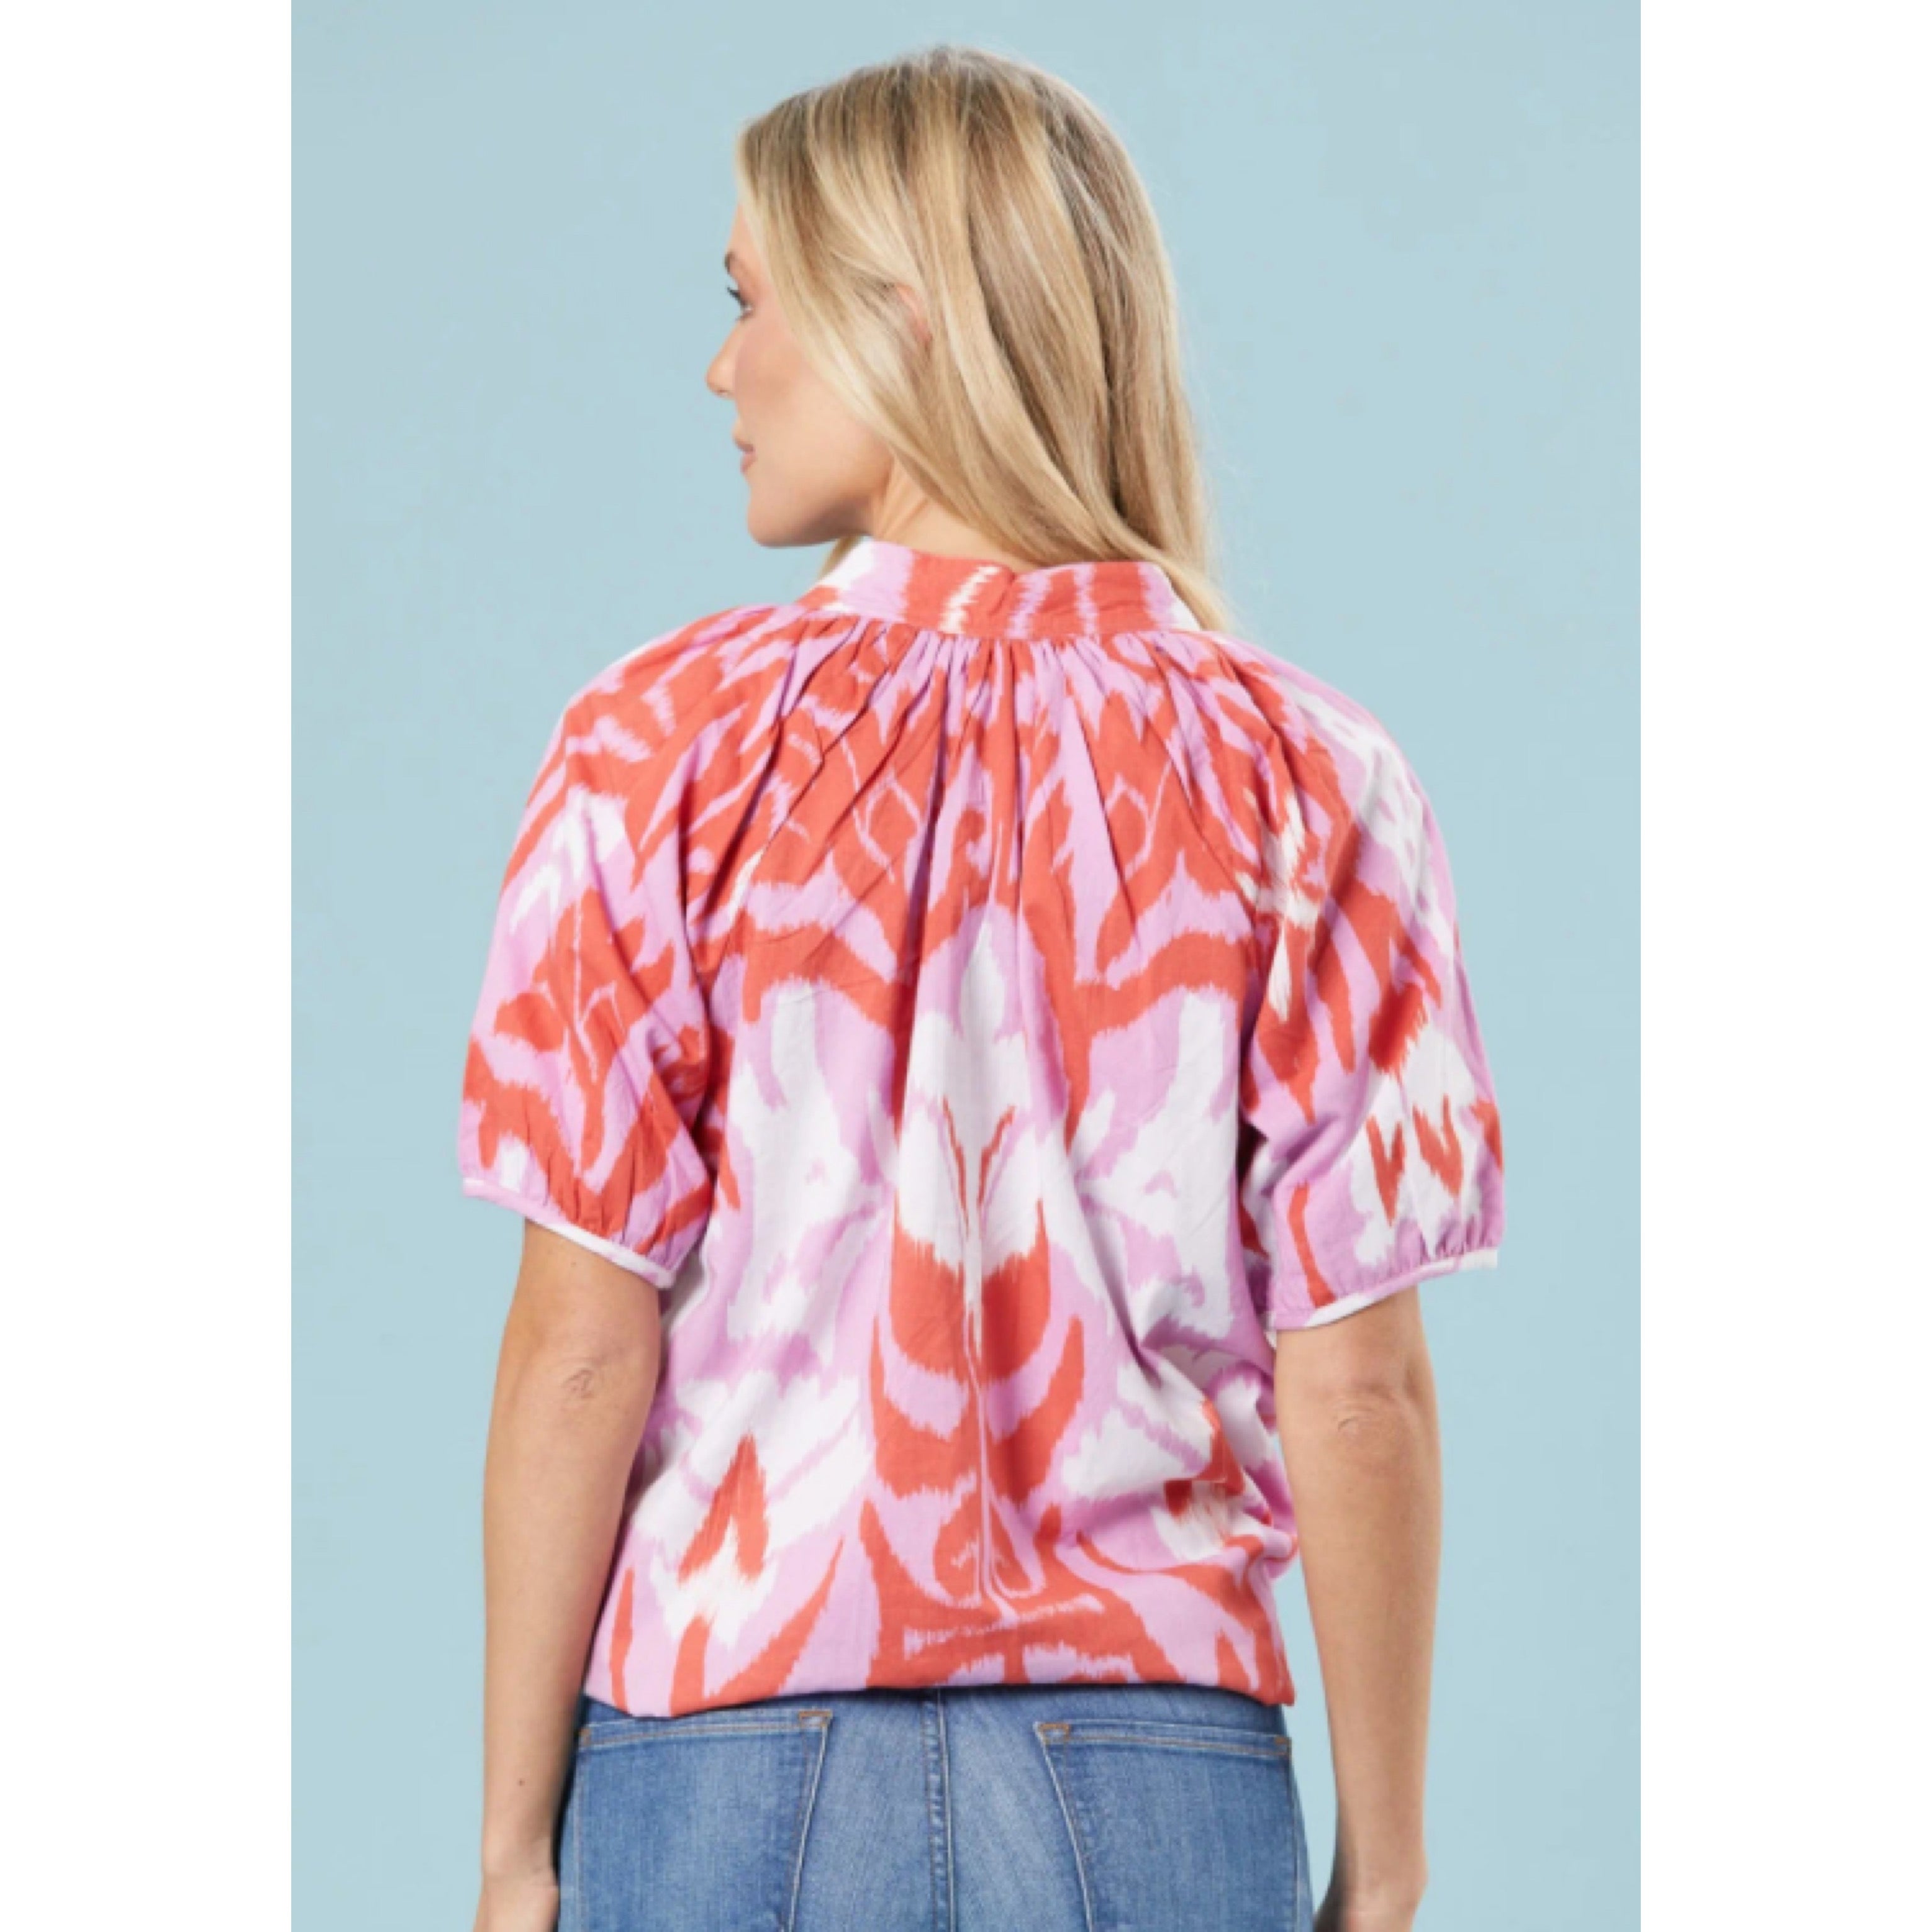 Sheridan French coral and lavender ikat blouse, size S